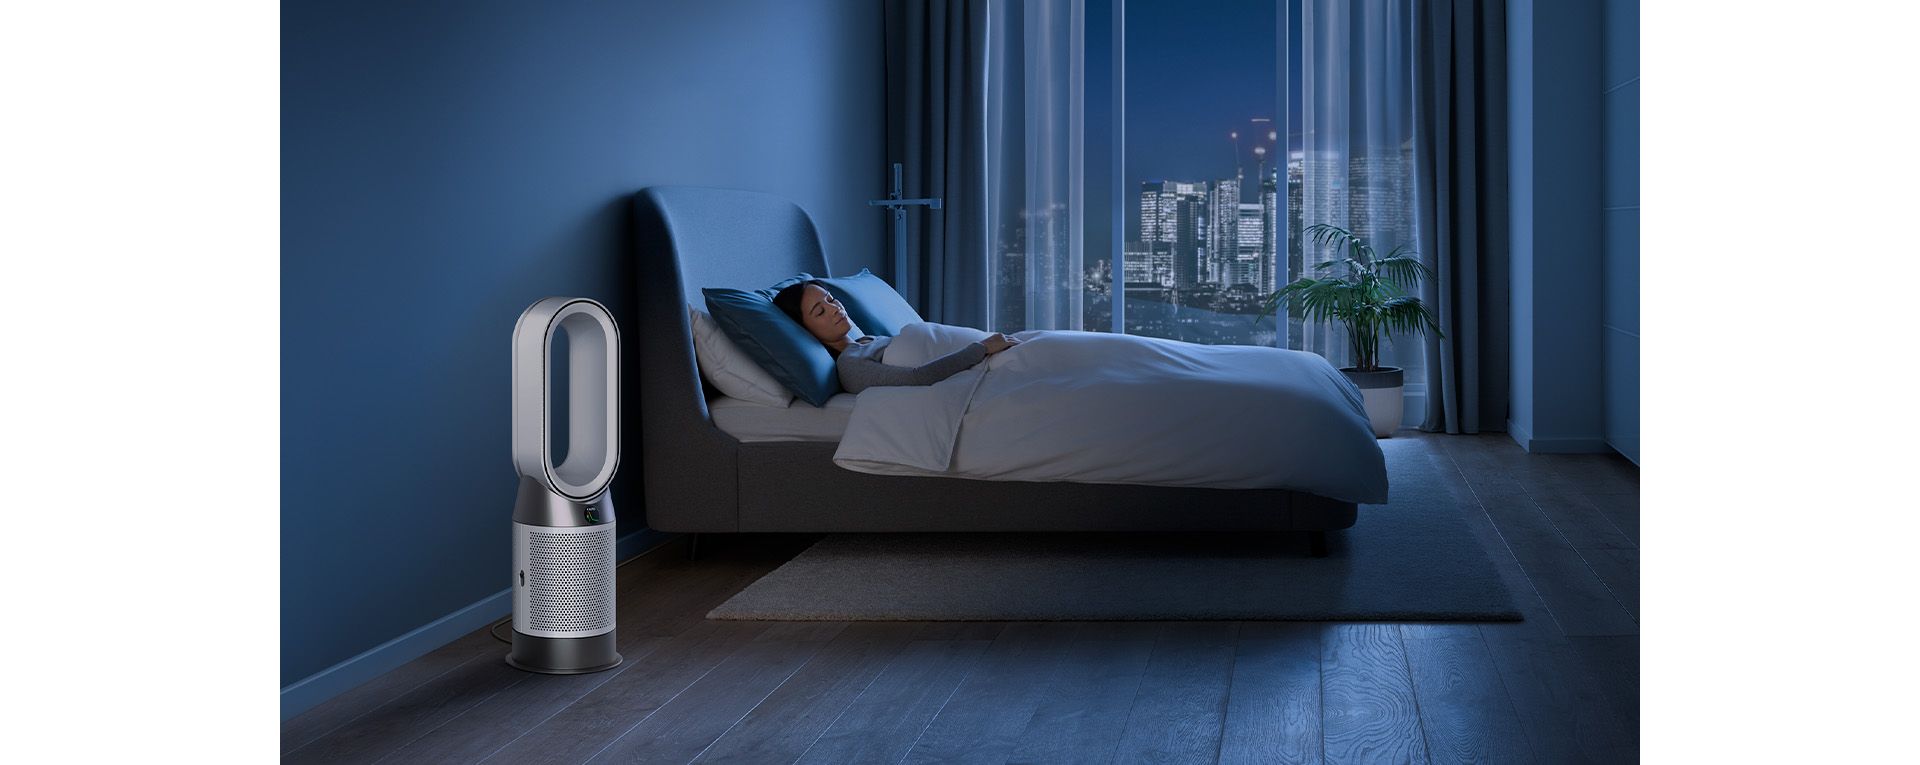 A Dyson purifier purifying a bedroom.